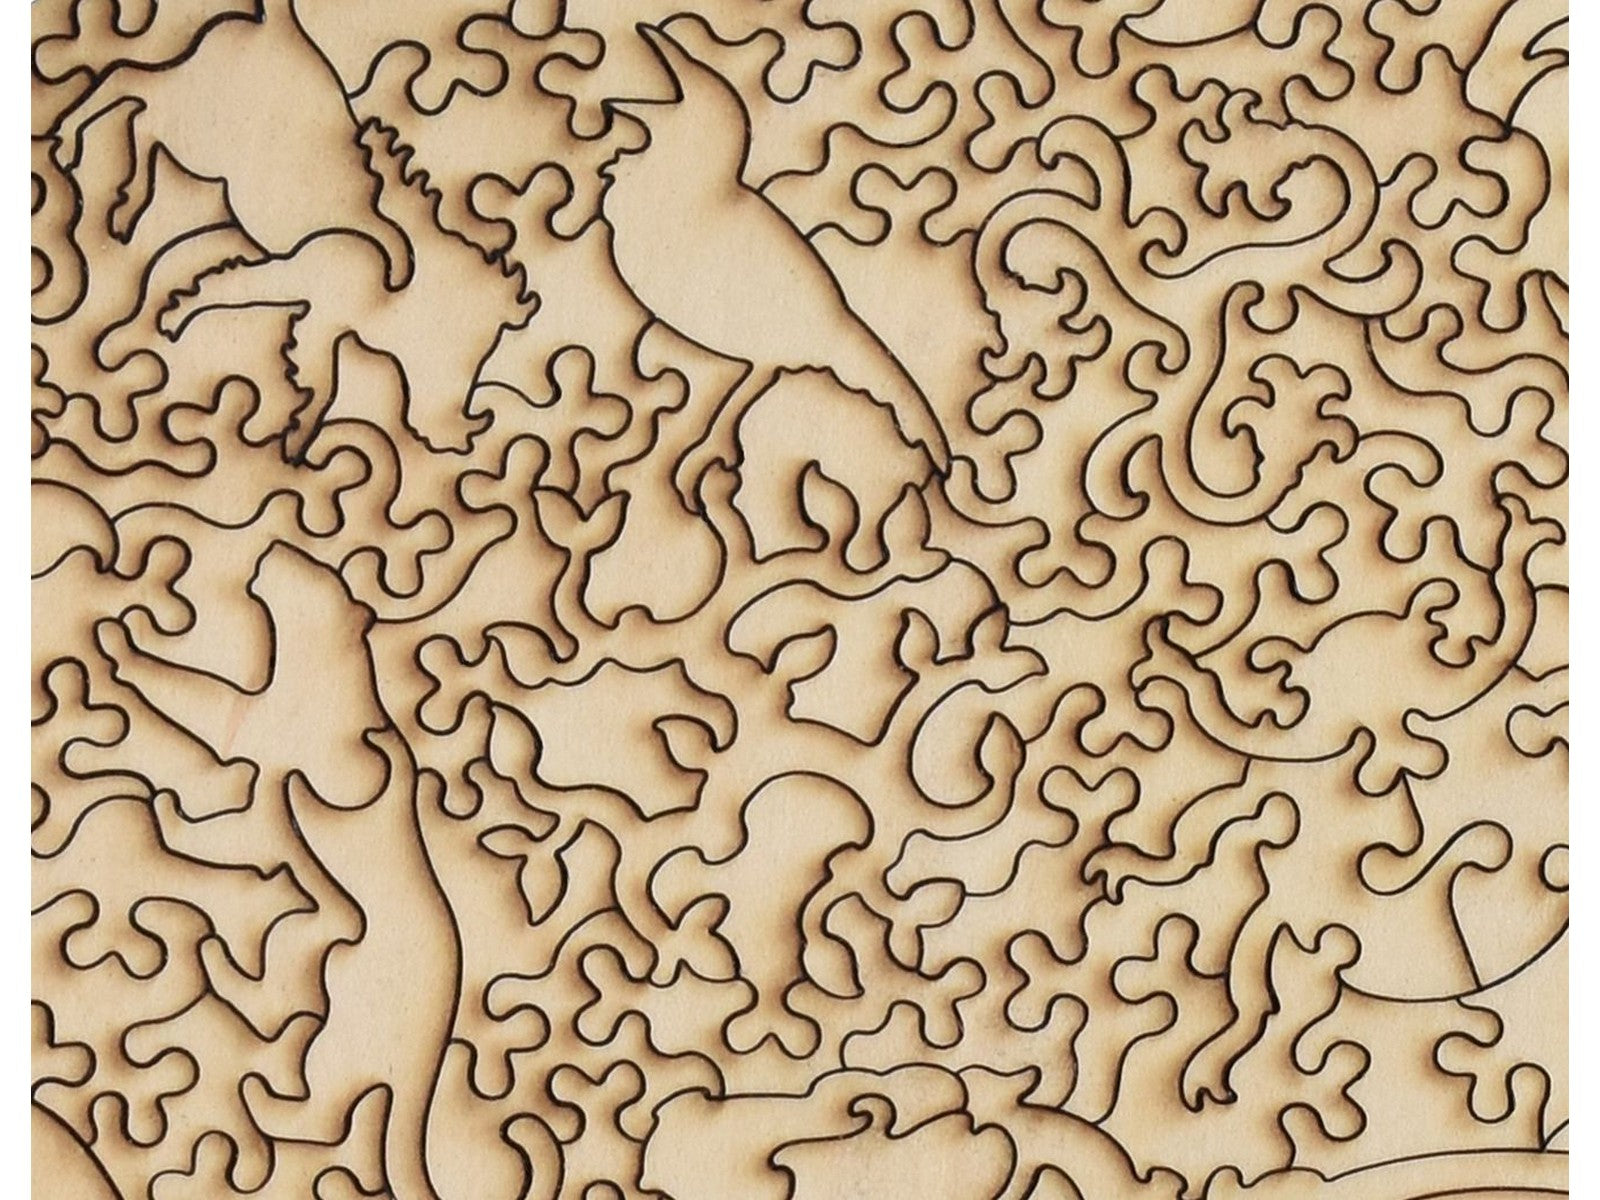 A second closeup of the back of the puzzle, Mabula Elephant, showing the detail in the pieces.